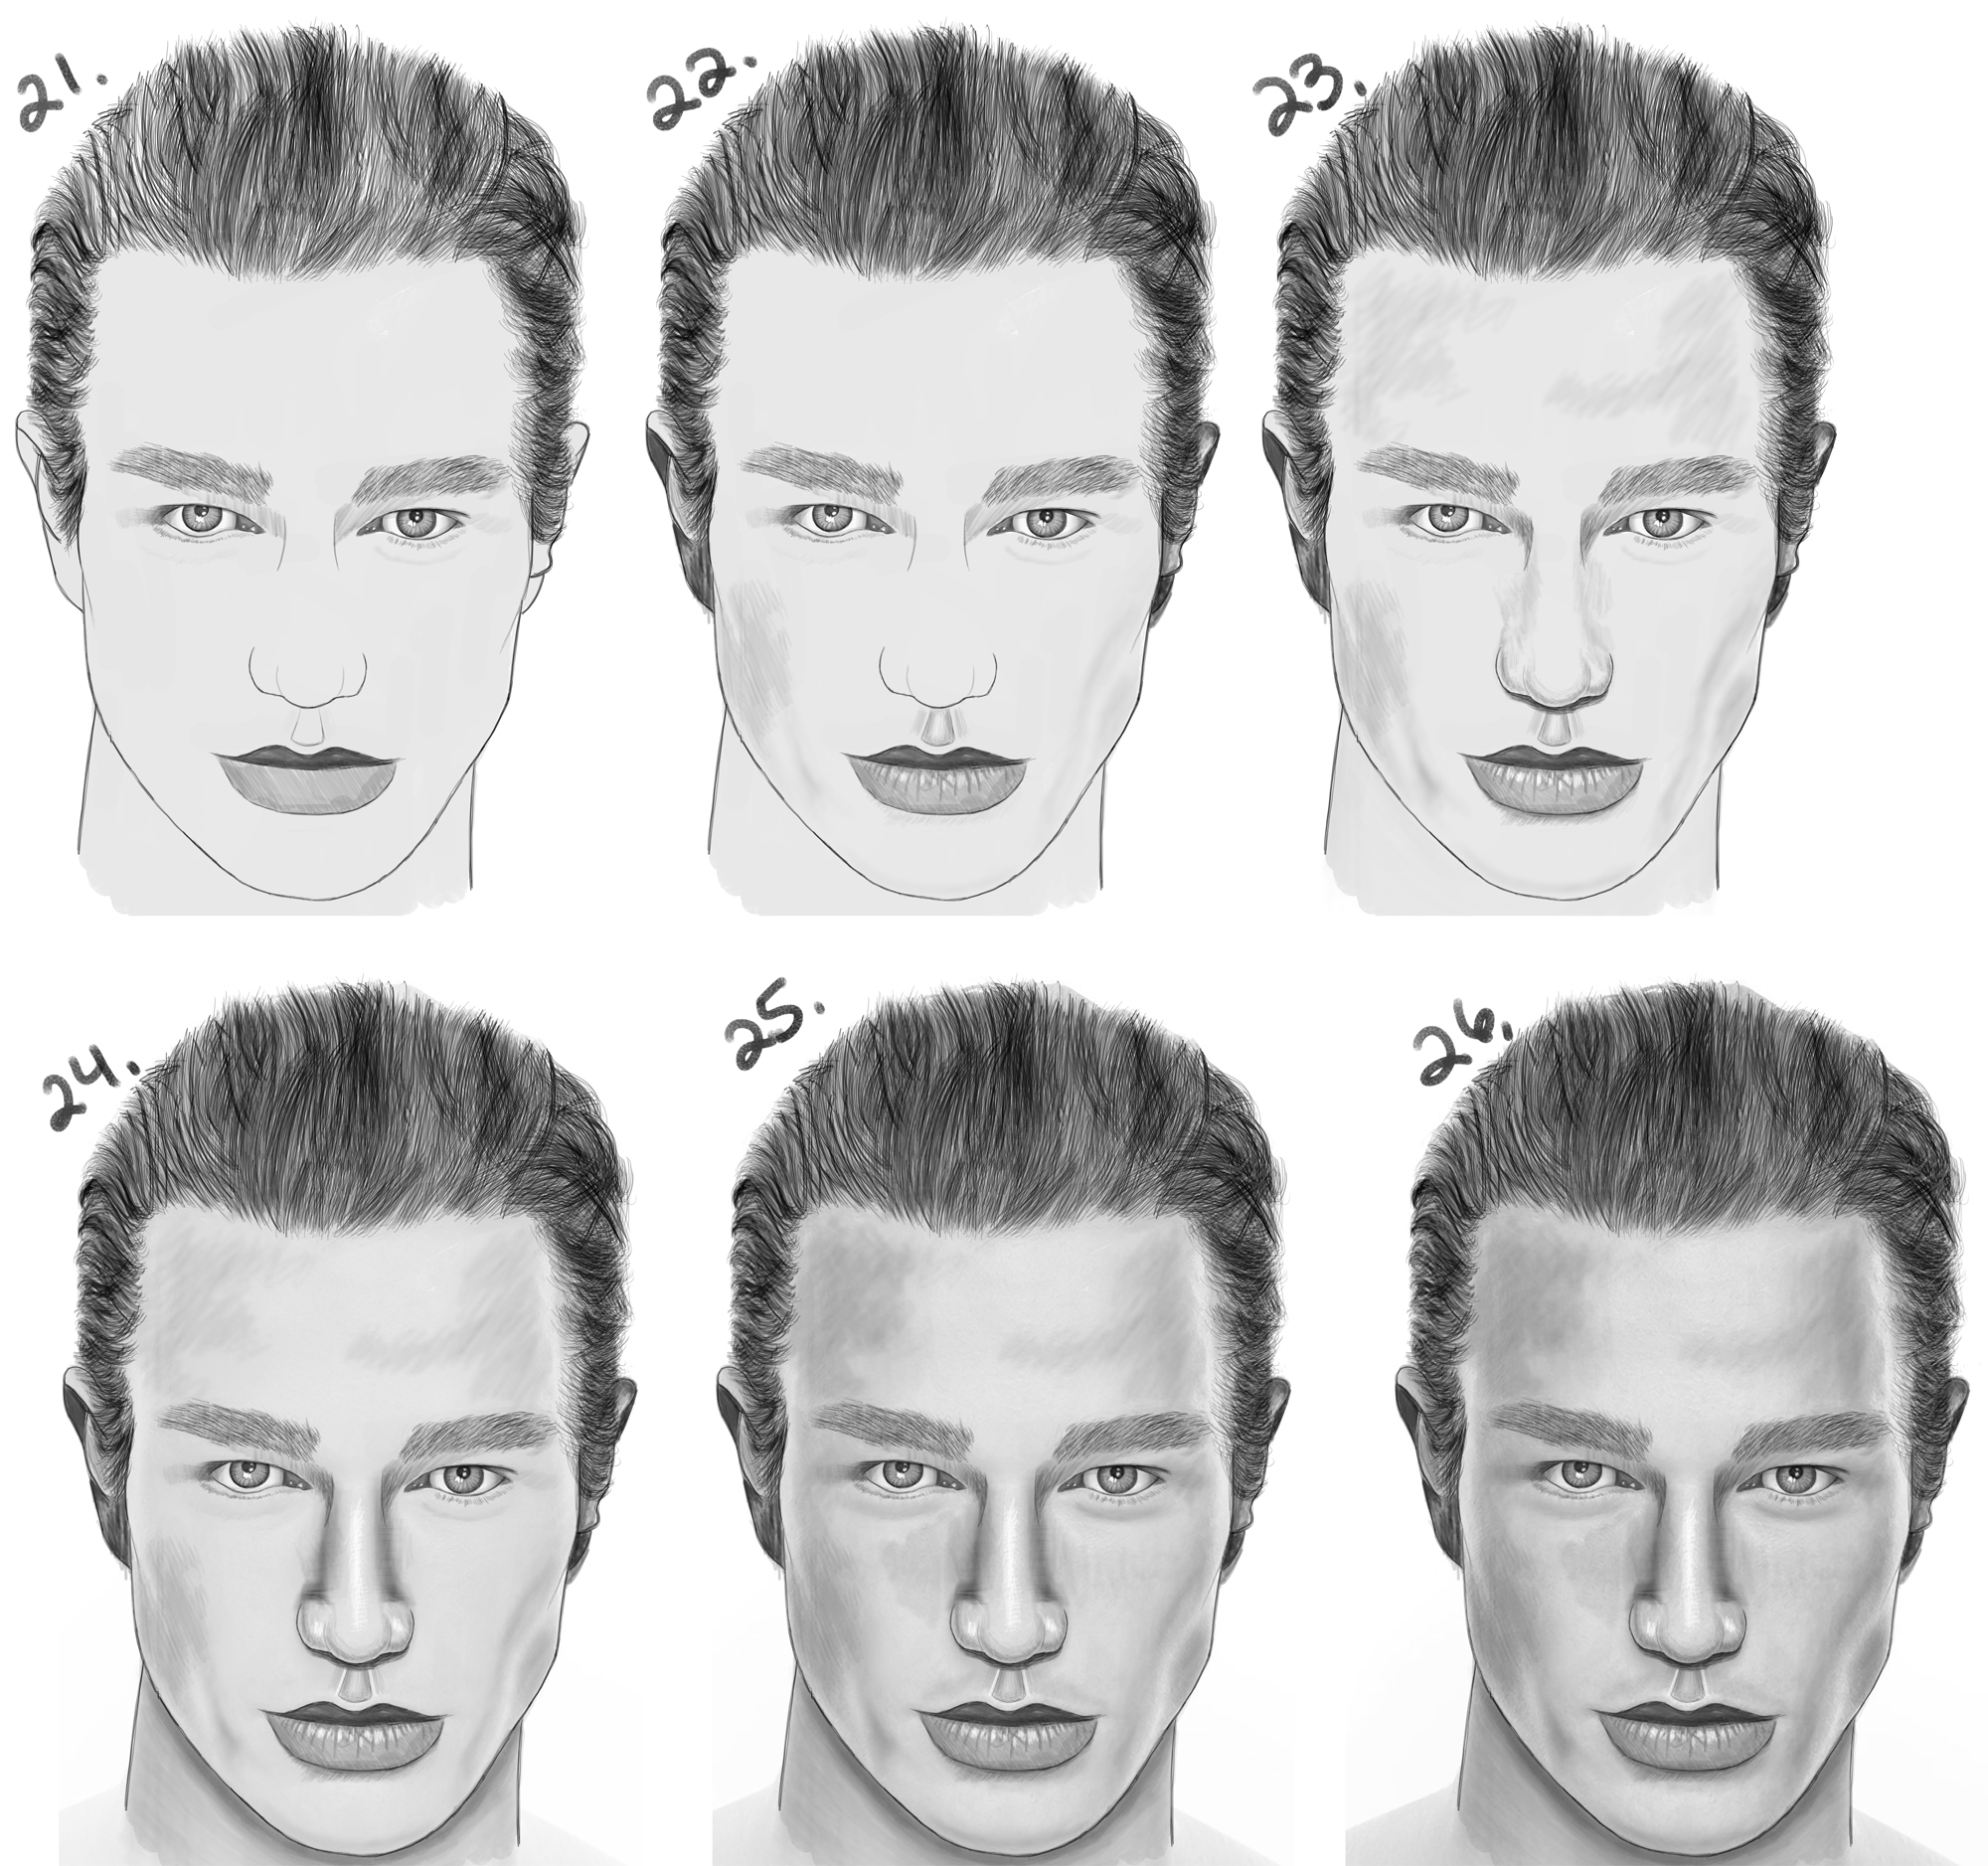 How To Draw A Man's Face Easy Step By Step / Drawing is an exciting